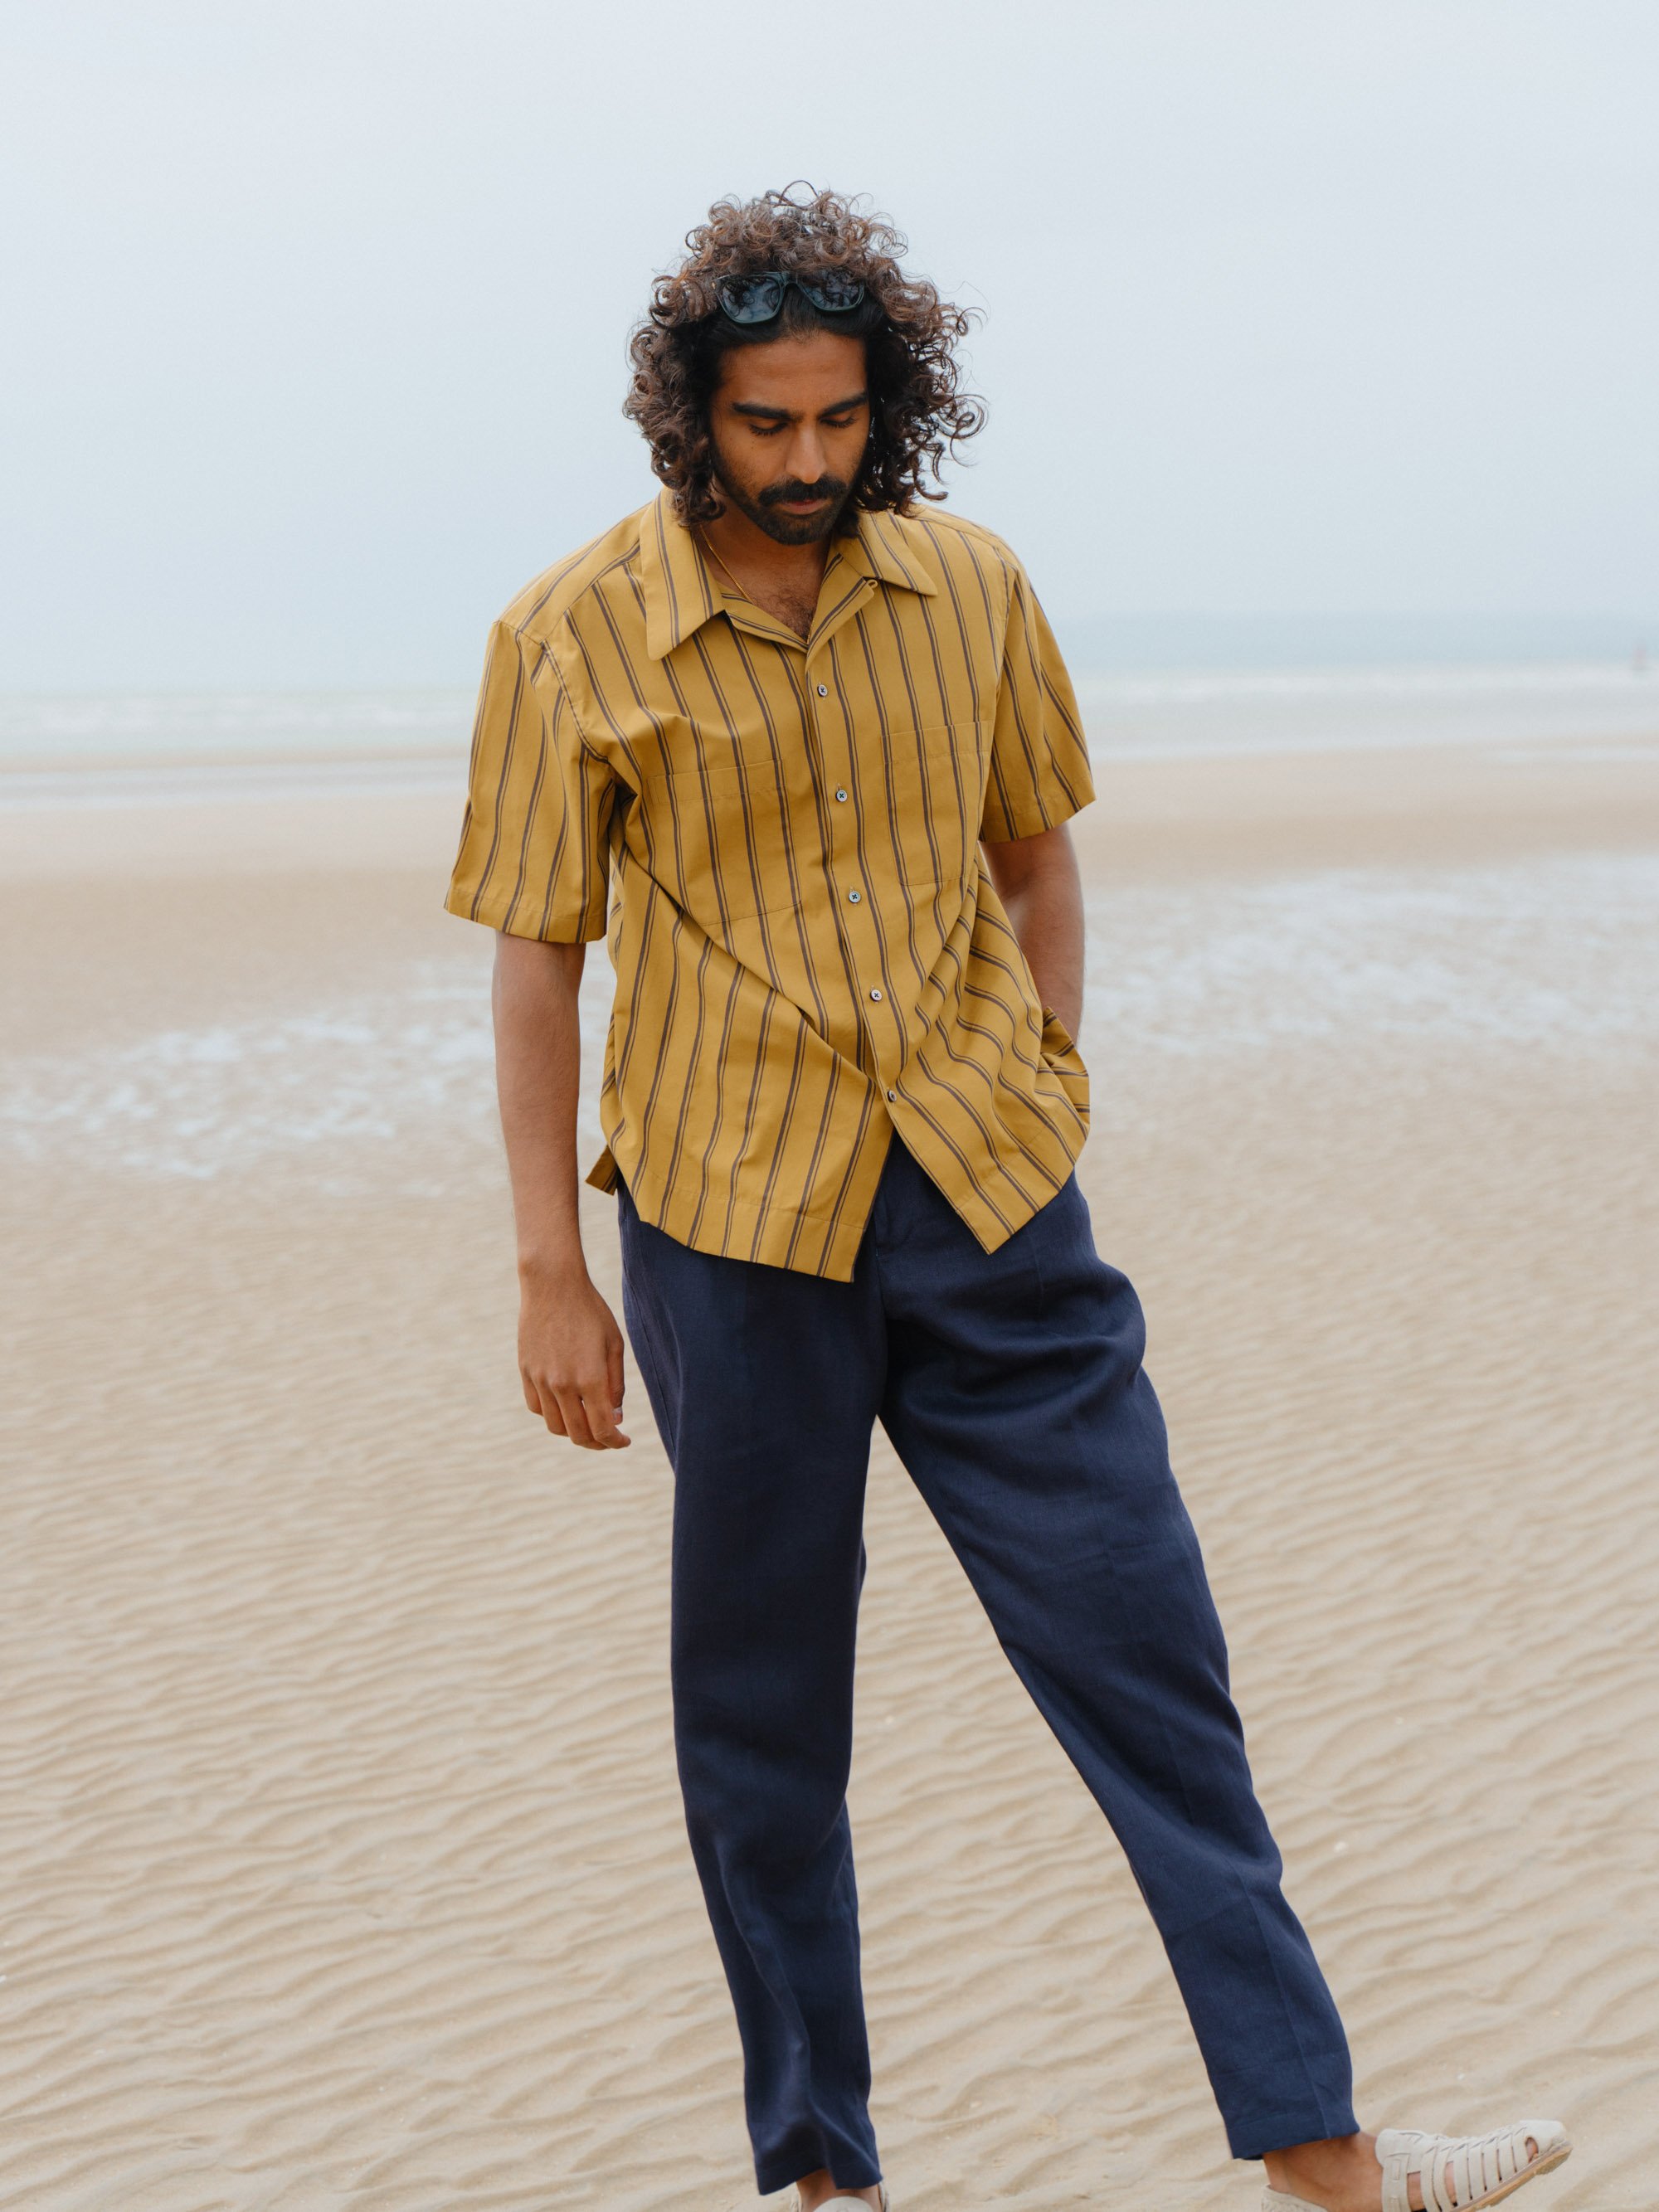 Linen Drawstring Trousers - Navy — The Anthology